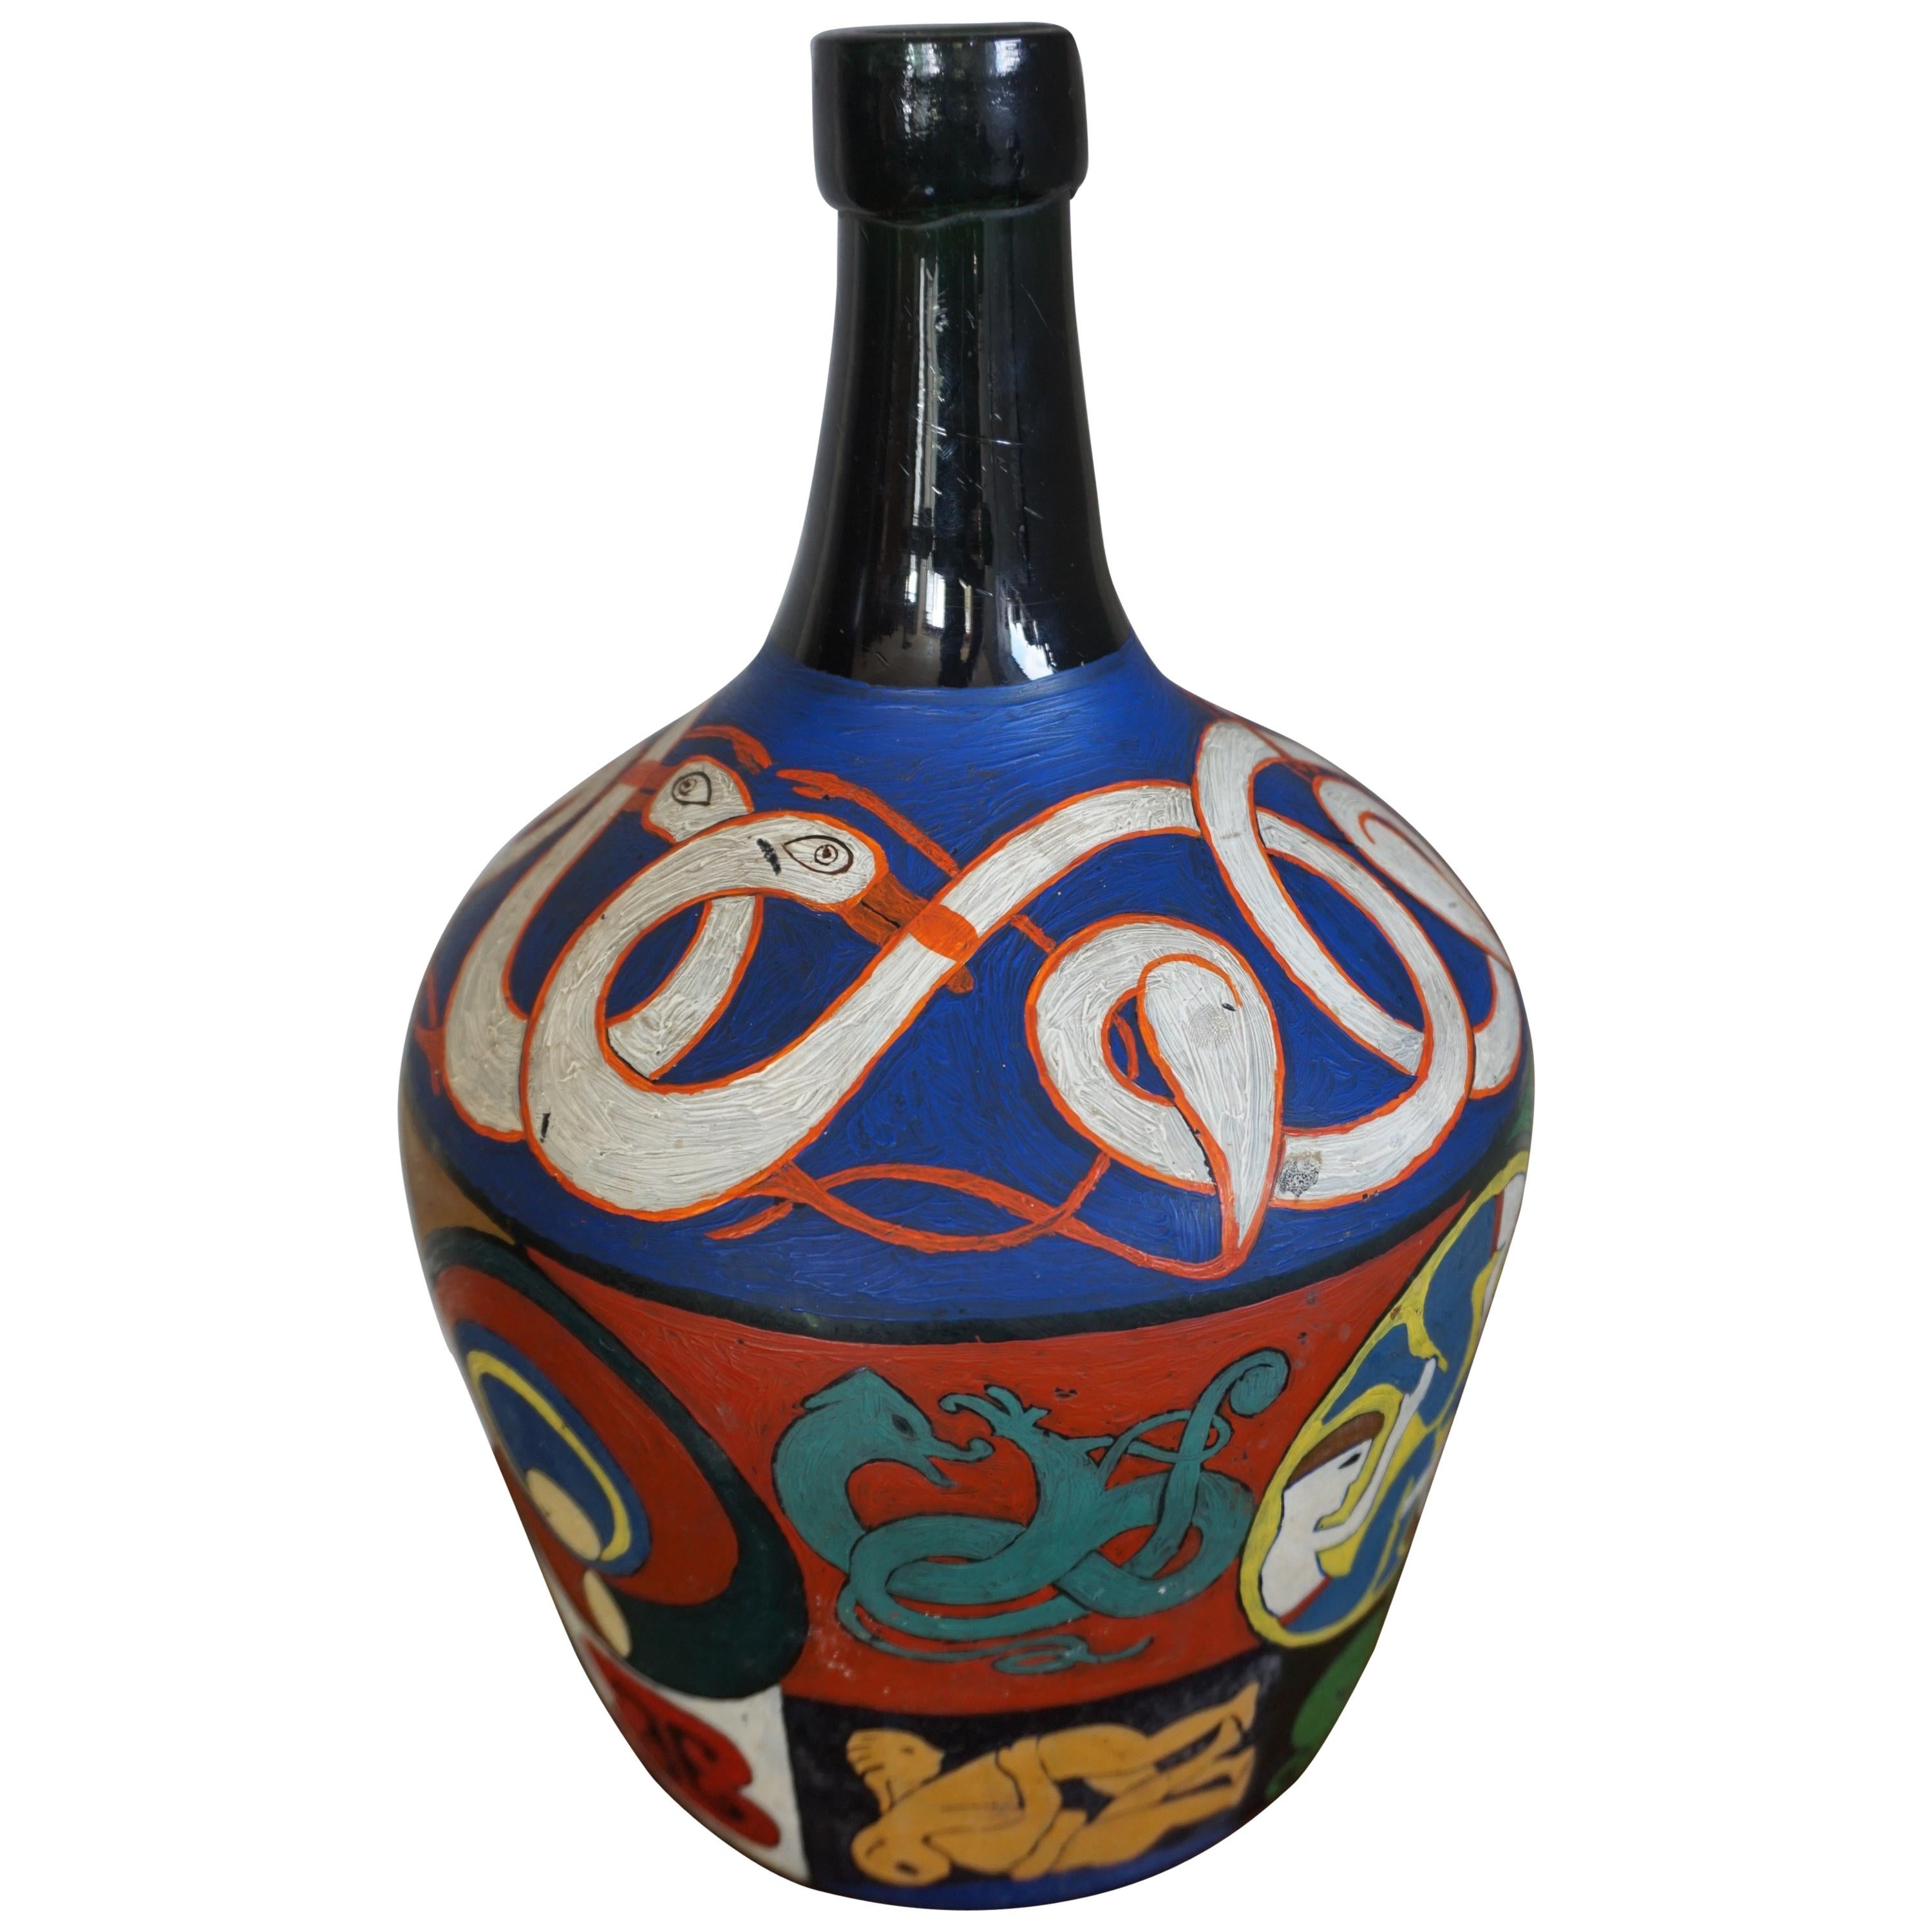 Decorative and Artistic Hand-Painted Bottle Folk Art with Colorful Symbolism For Sale